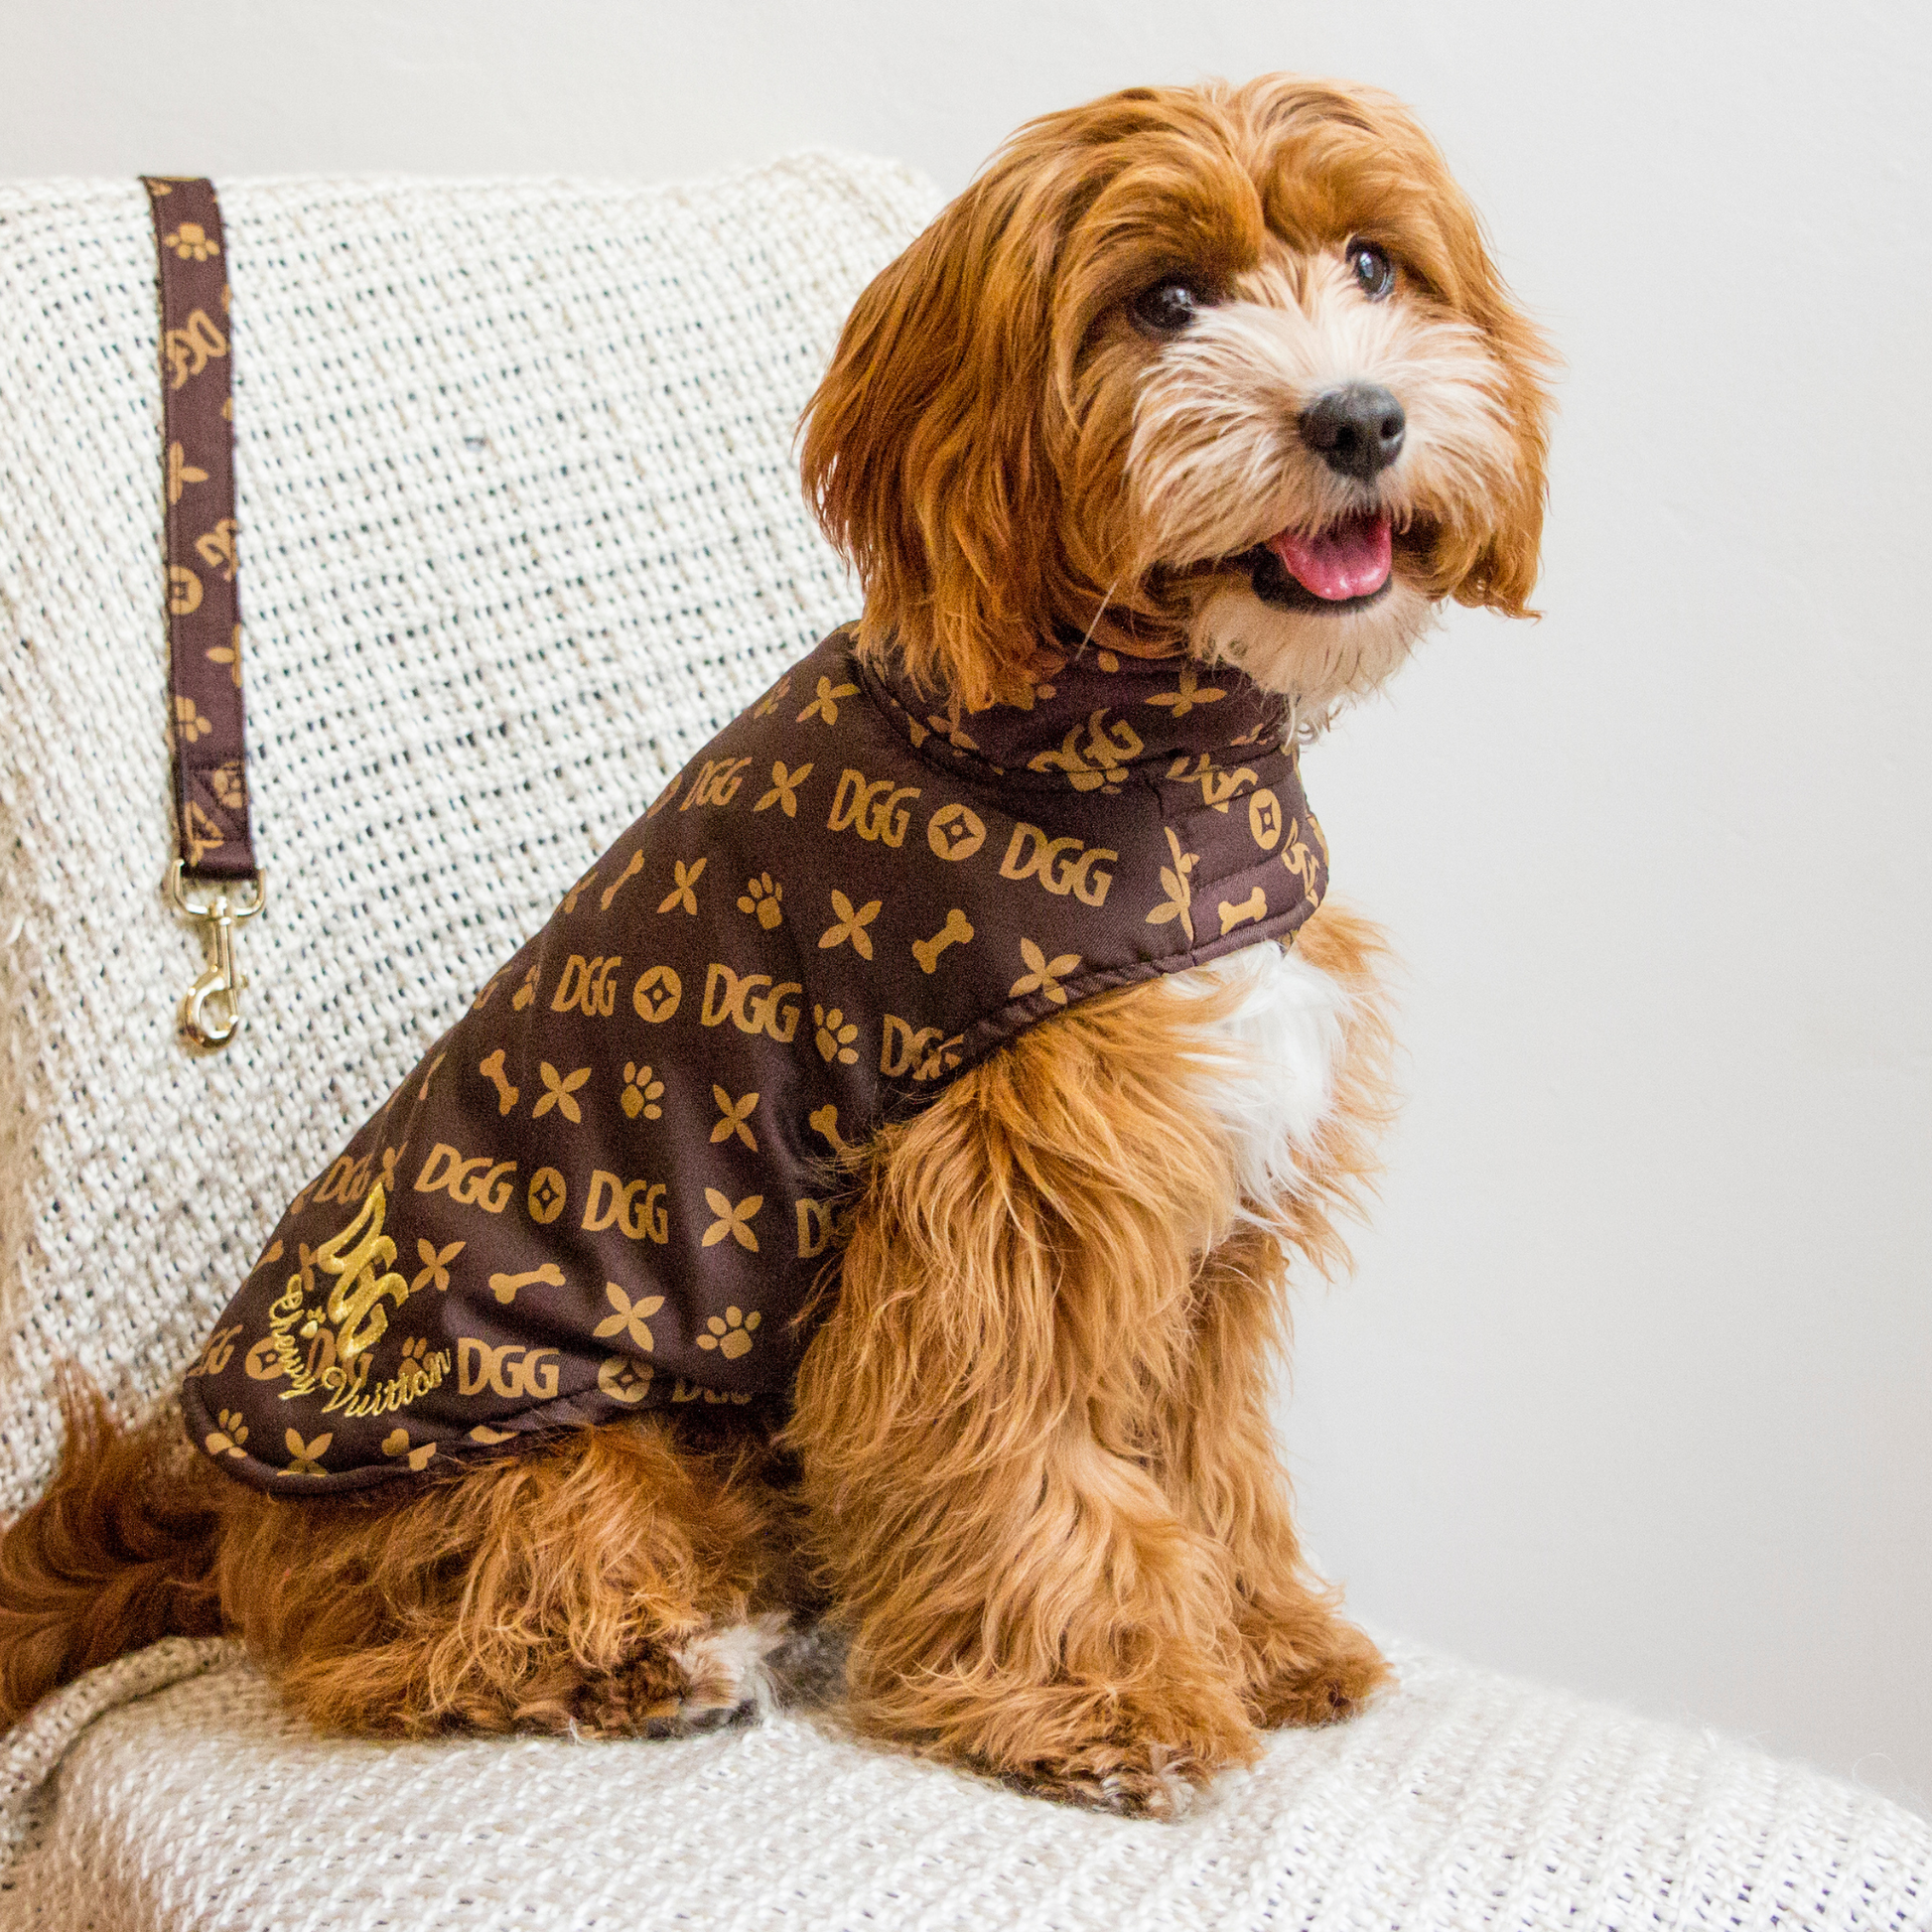 cute dog in DGG chewy vuitton parka